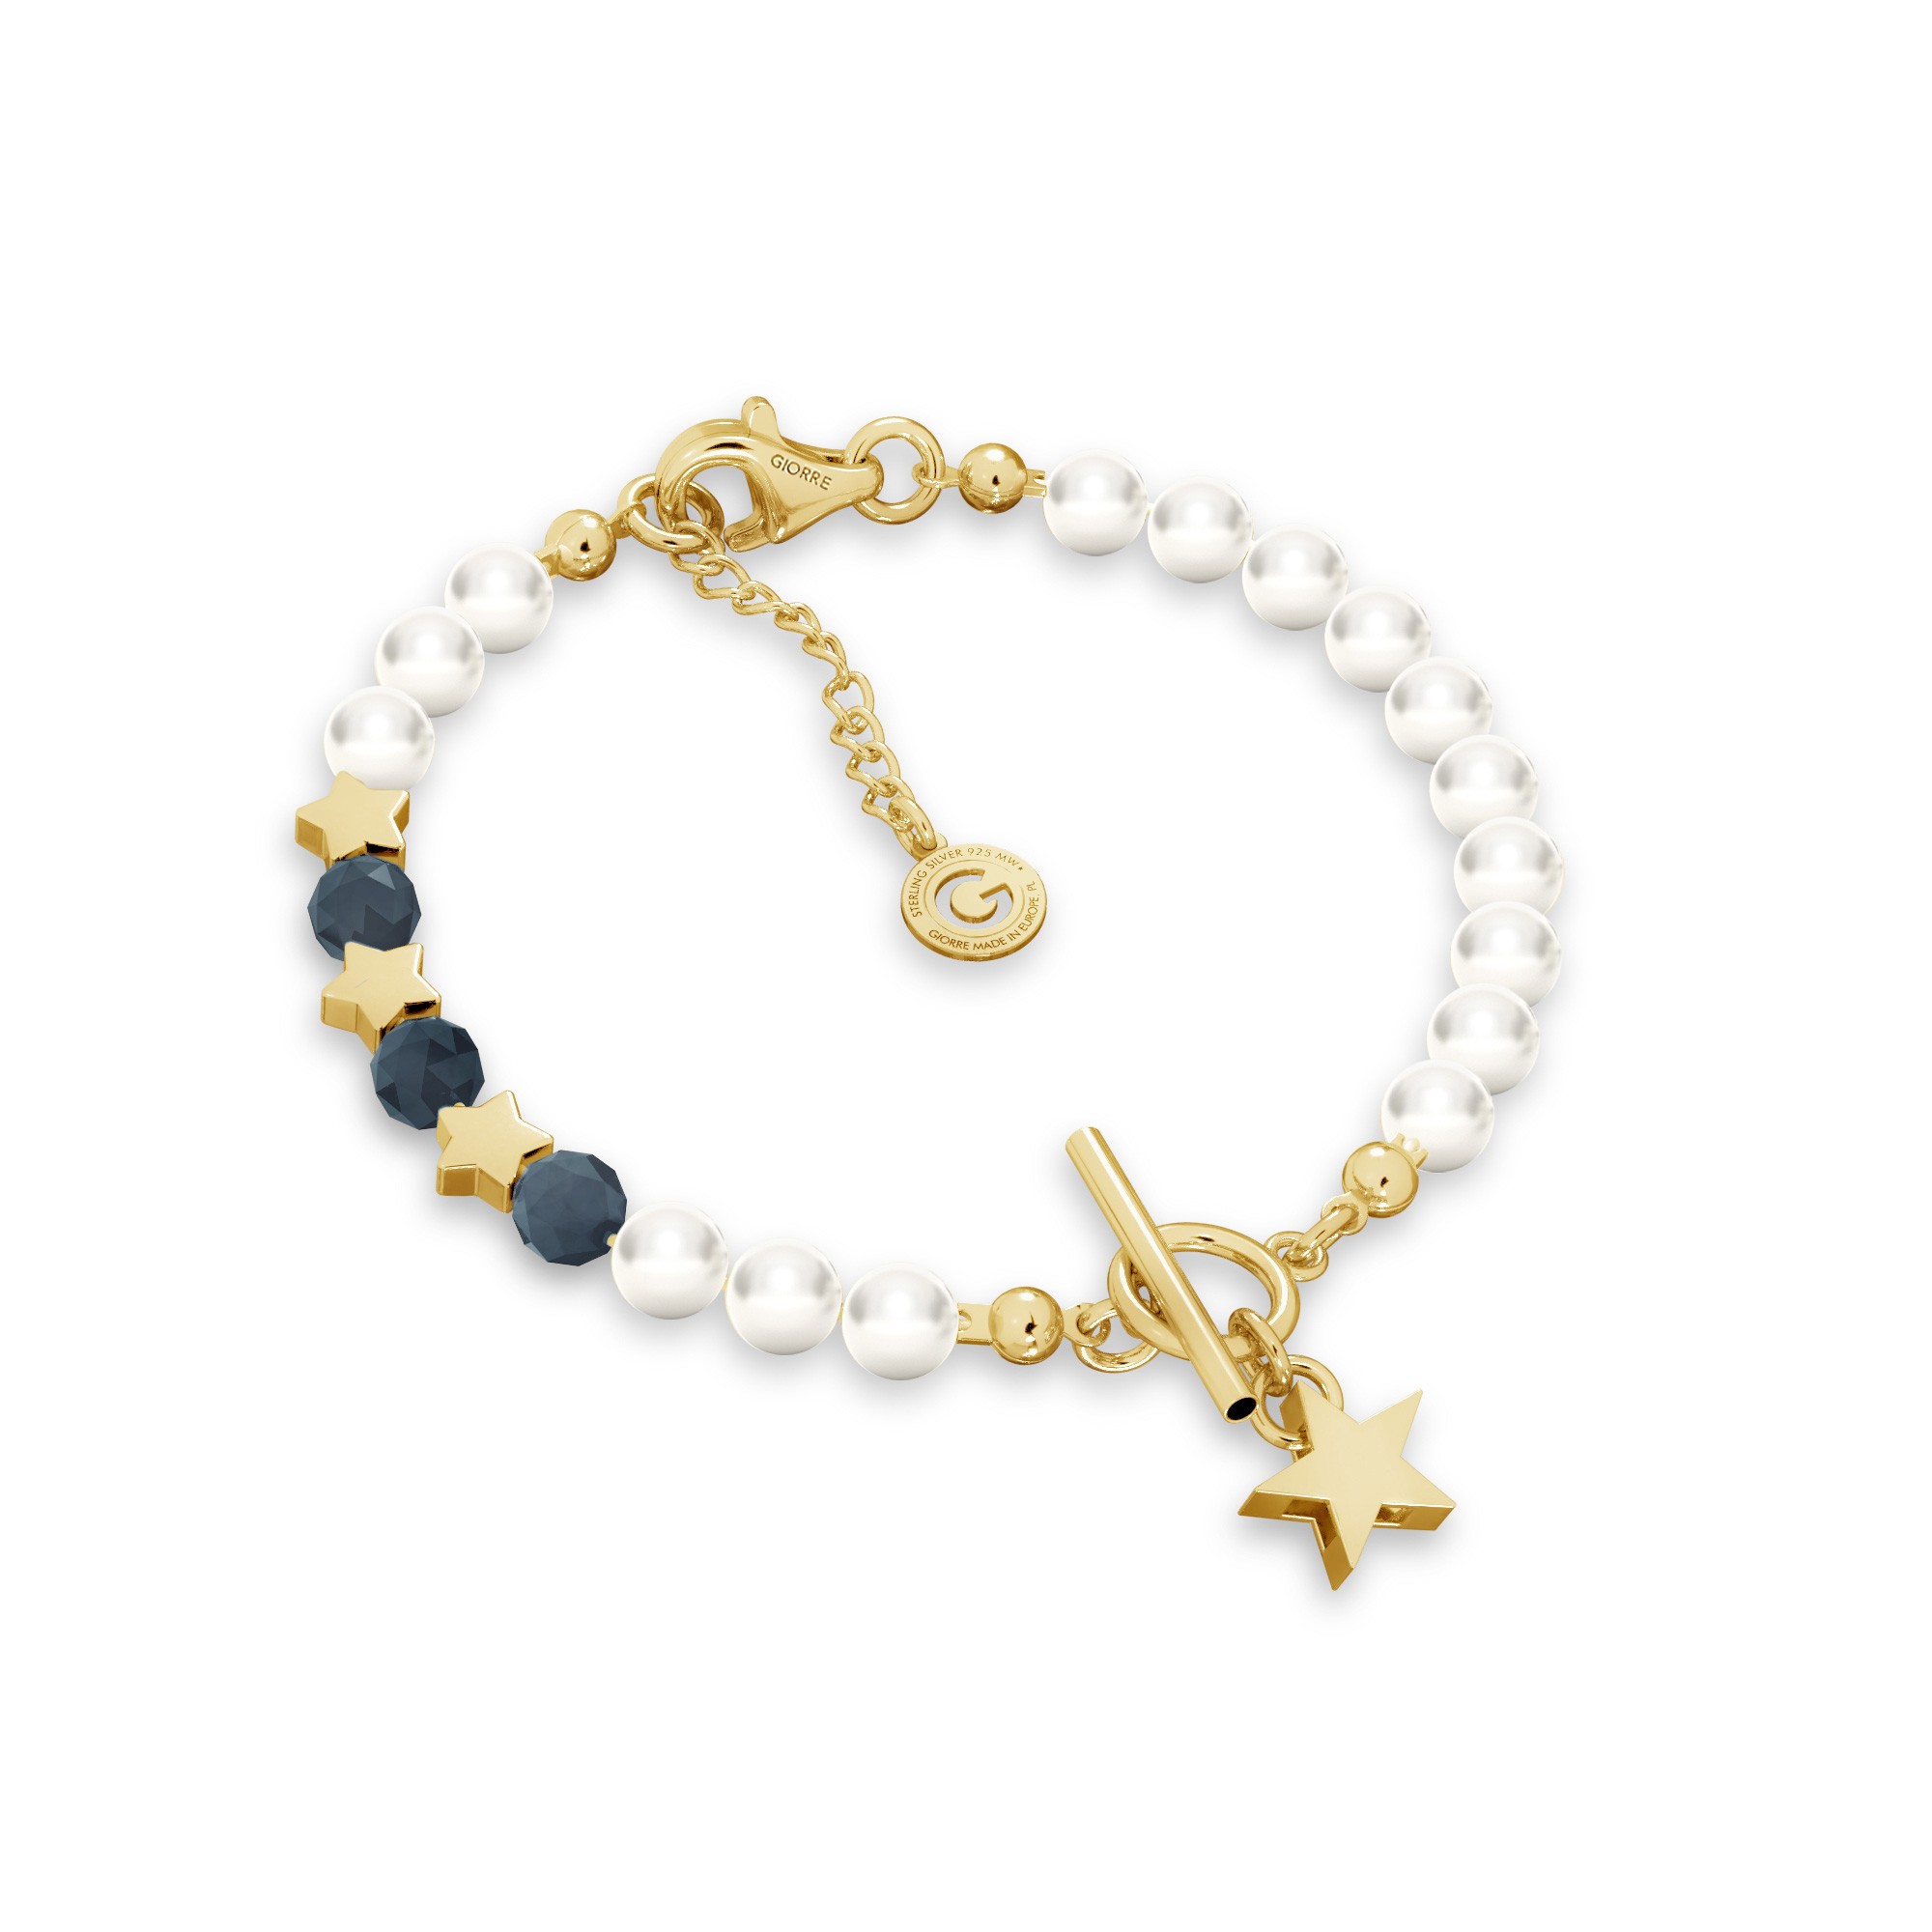 Sapphire pearl bracelet with stars, sterling silver 925